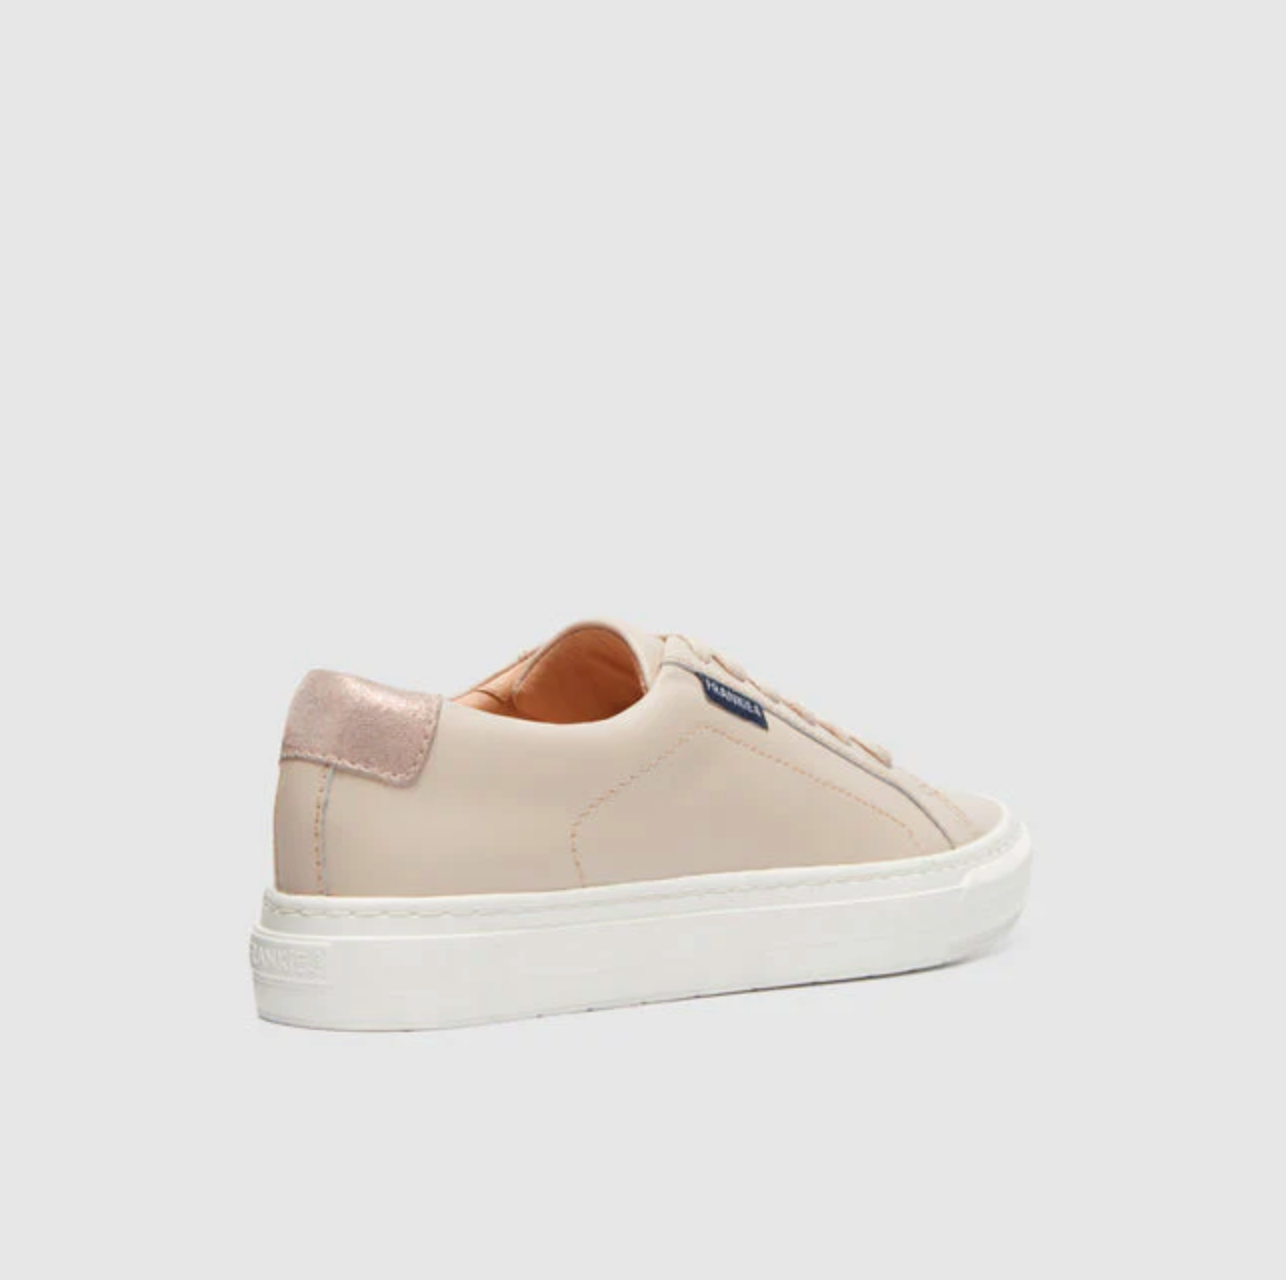 Frankie4 MiM Almond Milk - Women sneakers - Collective Shoes 